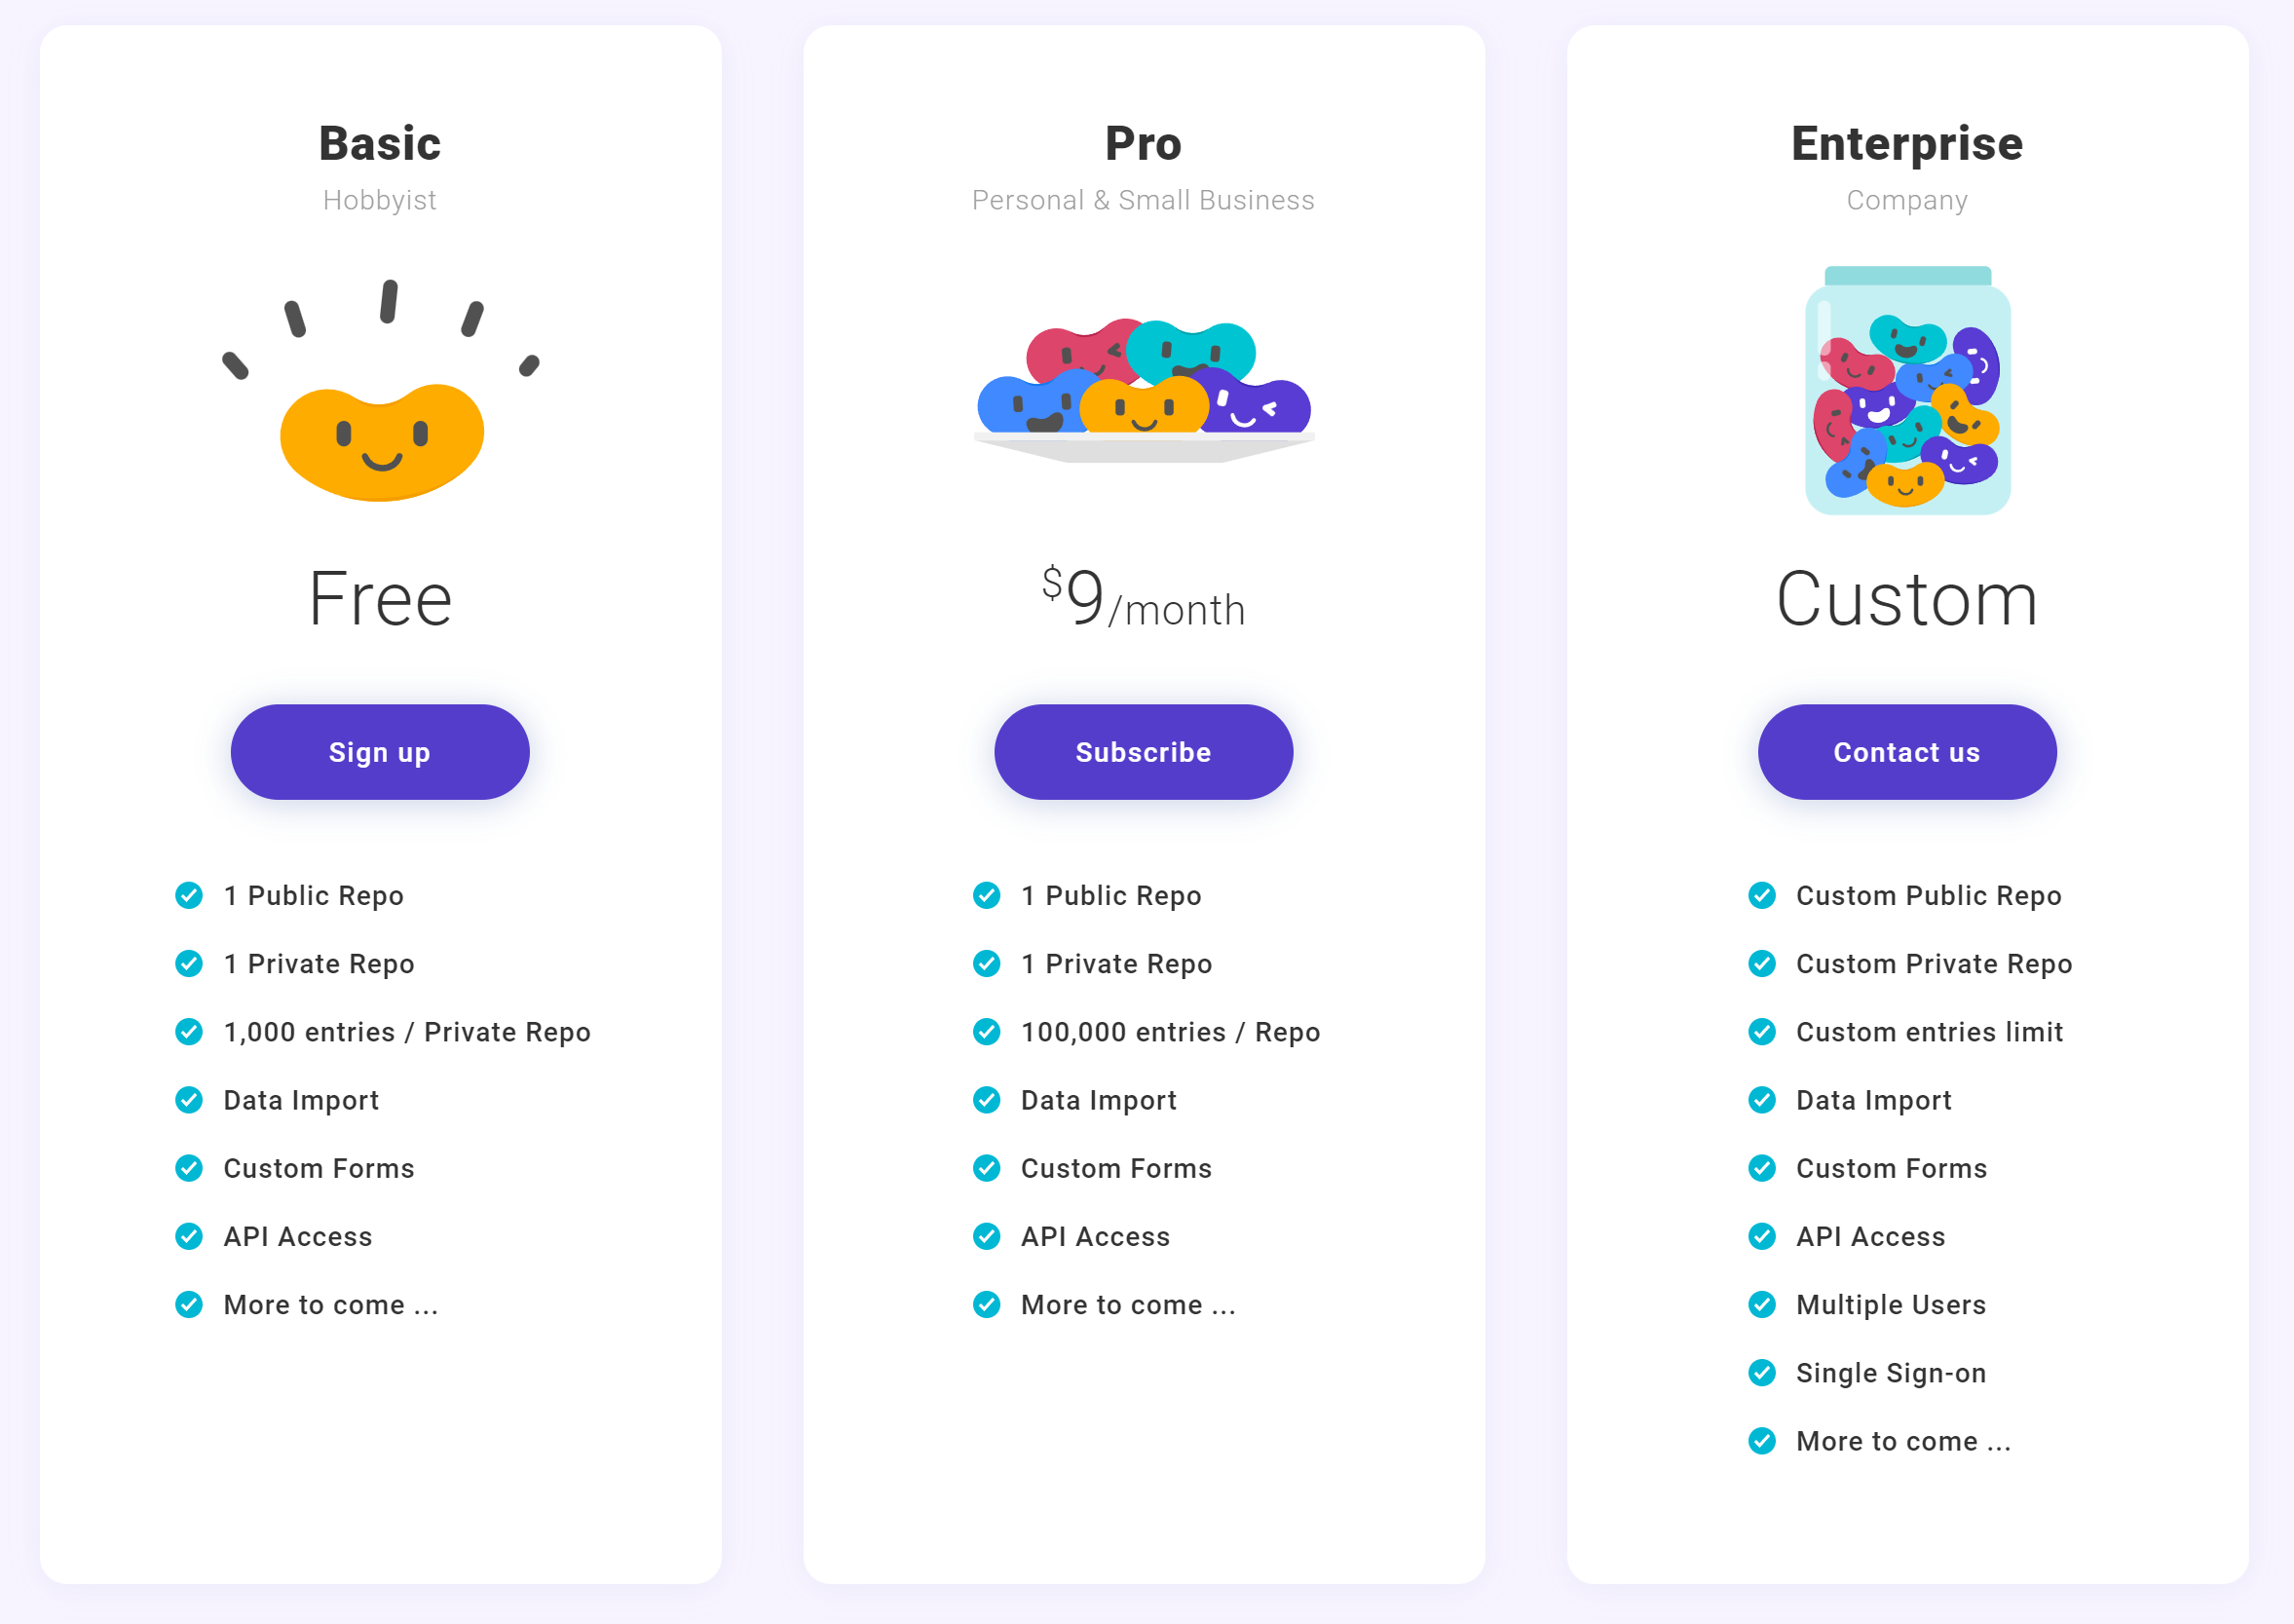 New pricing shows free users now also have one private repository with 1,000 entries limit